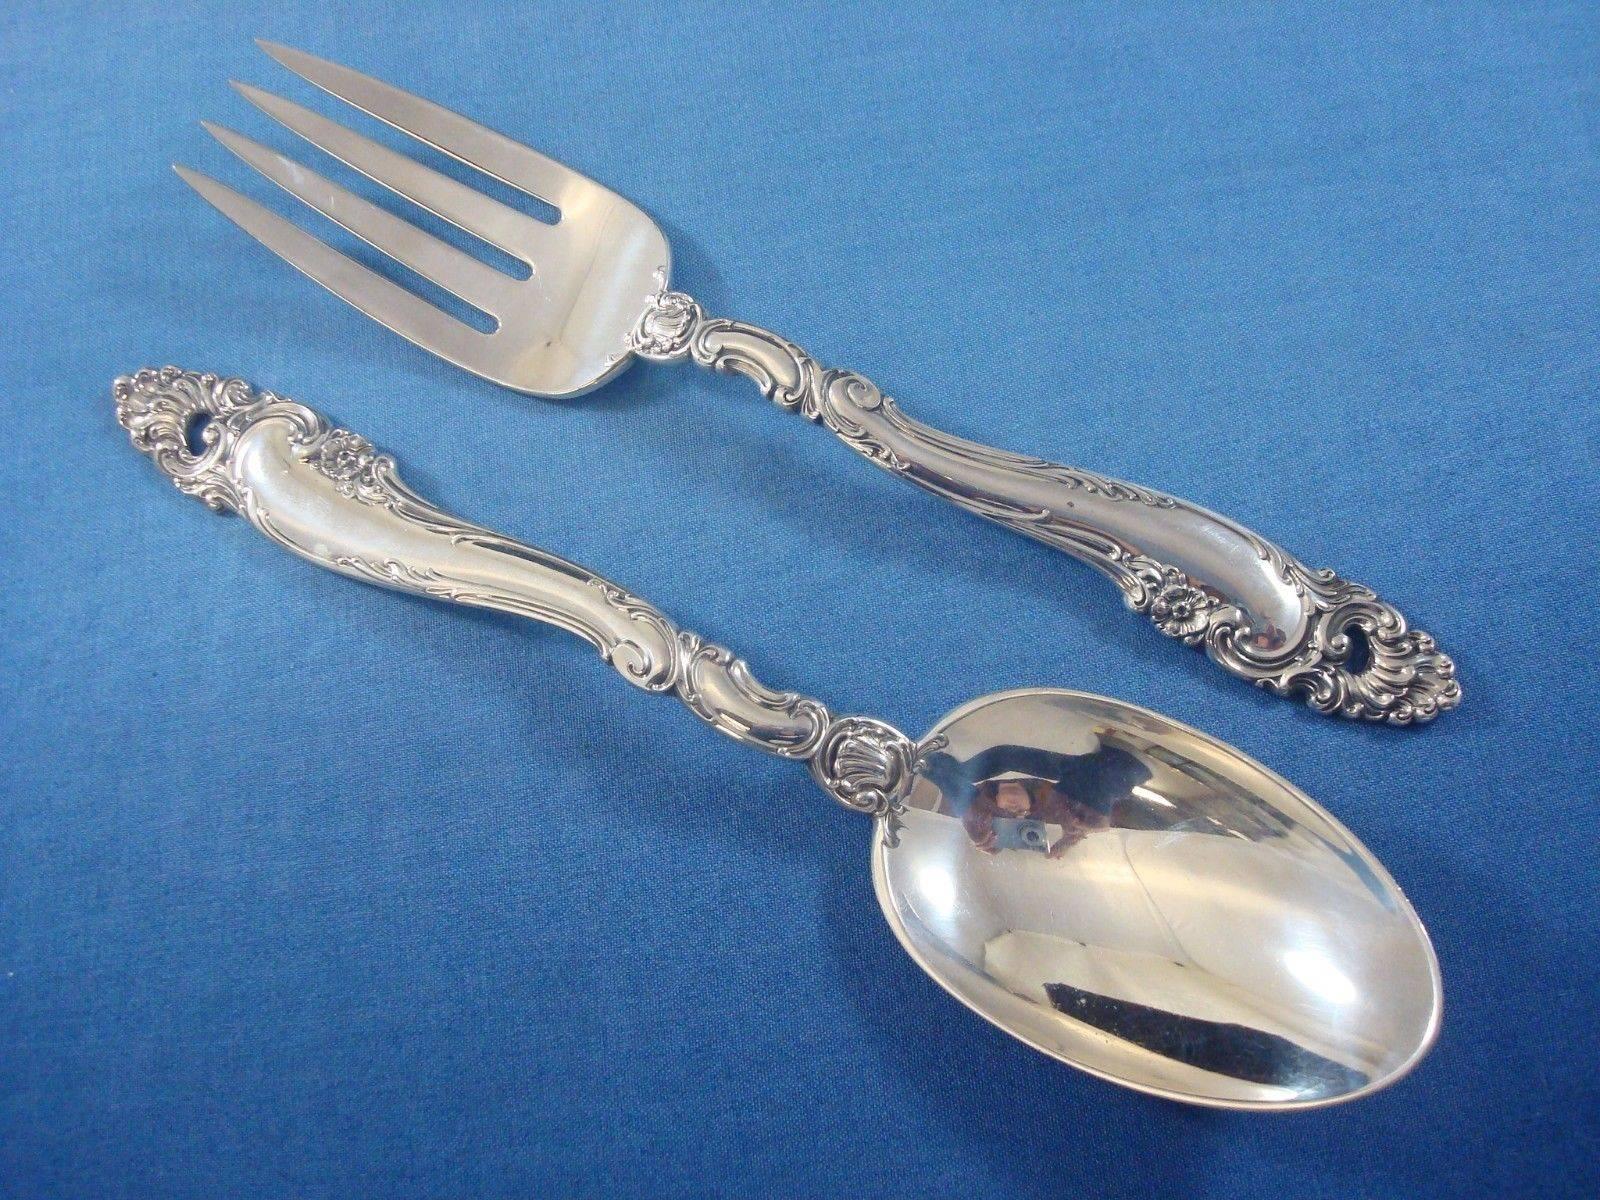 Decor by Gorham Sterling Silver Flatware Set 8 Service Luncheon Size 36 Pieces 4